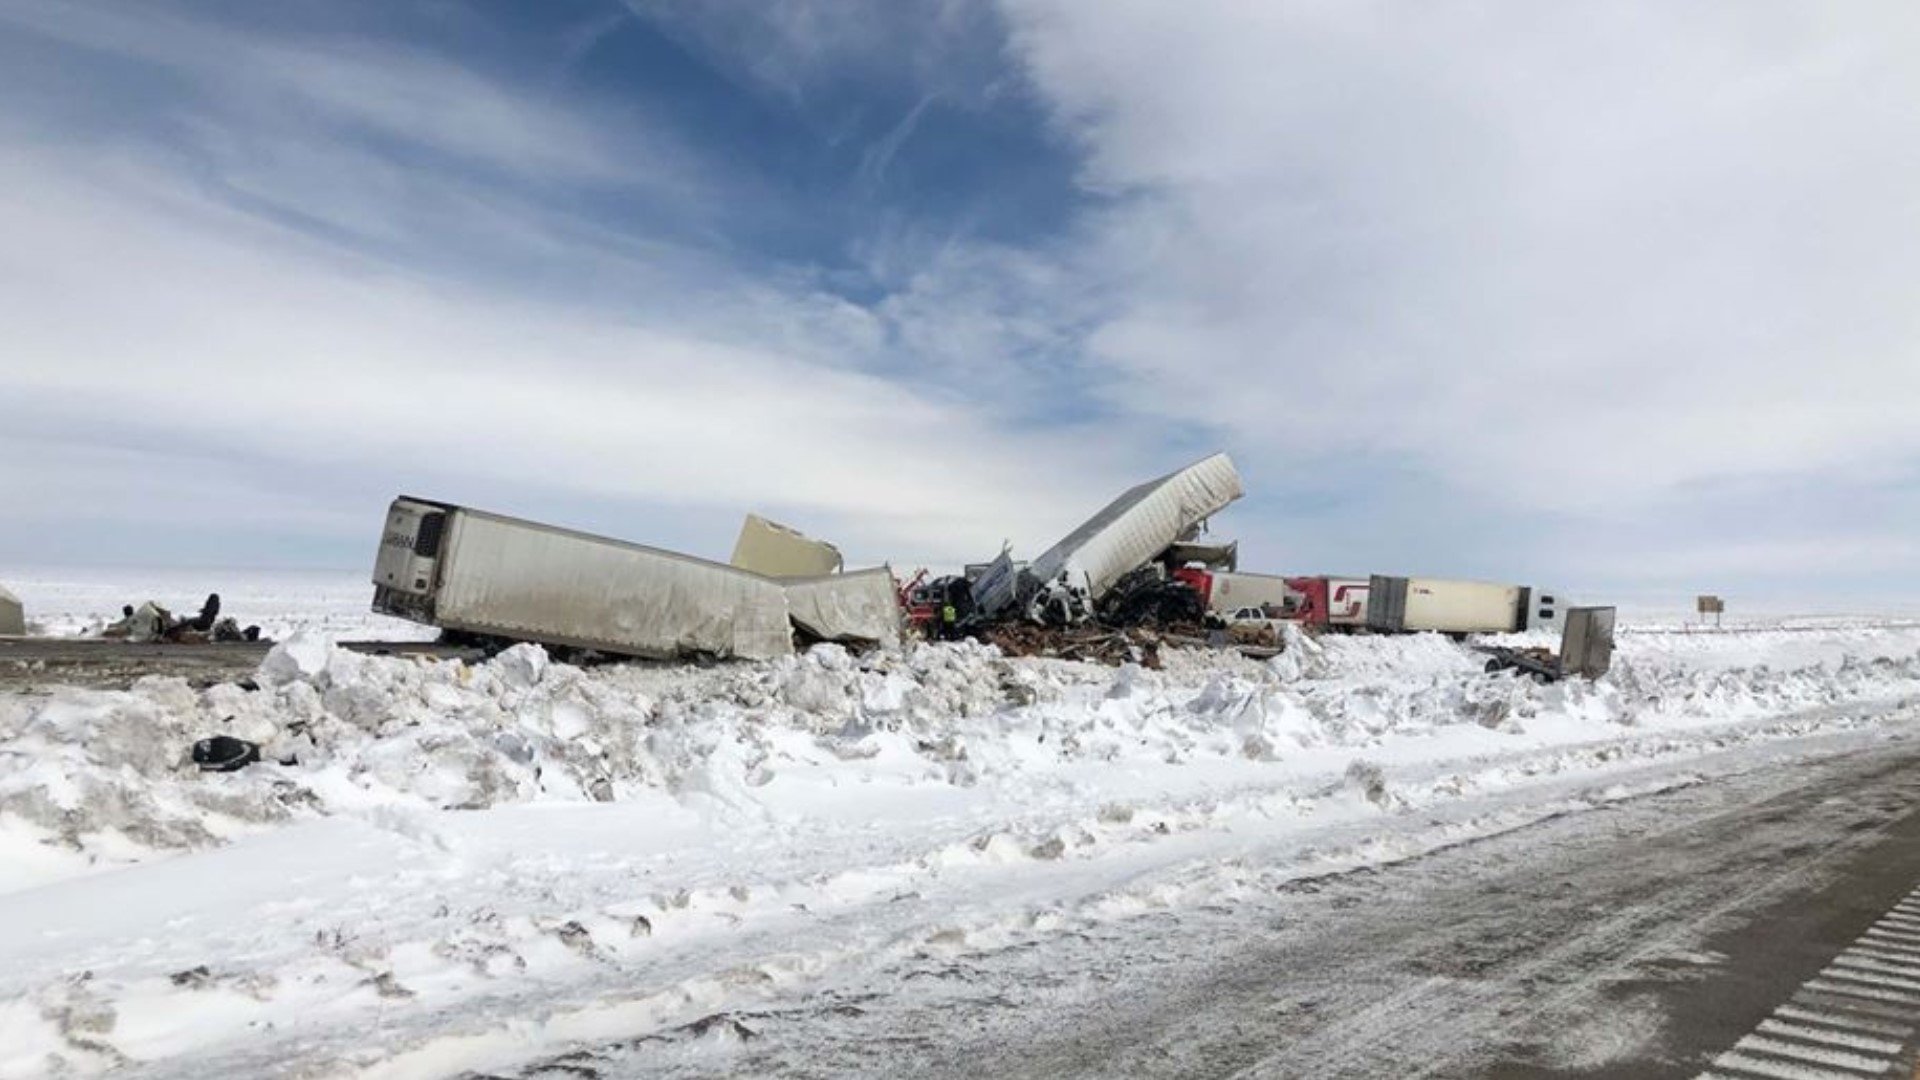 3 dead, dozens injured in a pileup of more than 100 vehicles on snowy